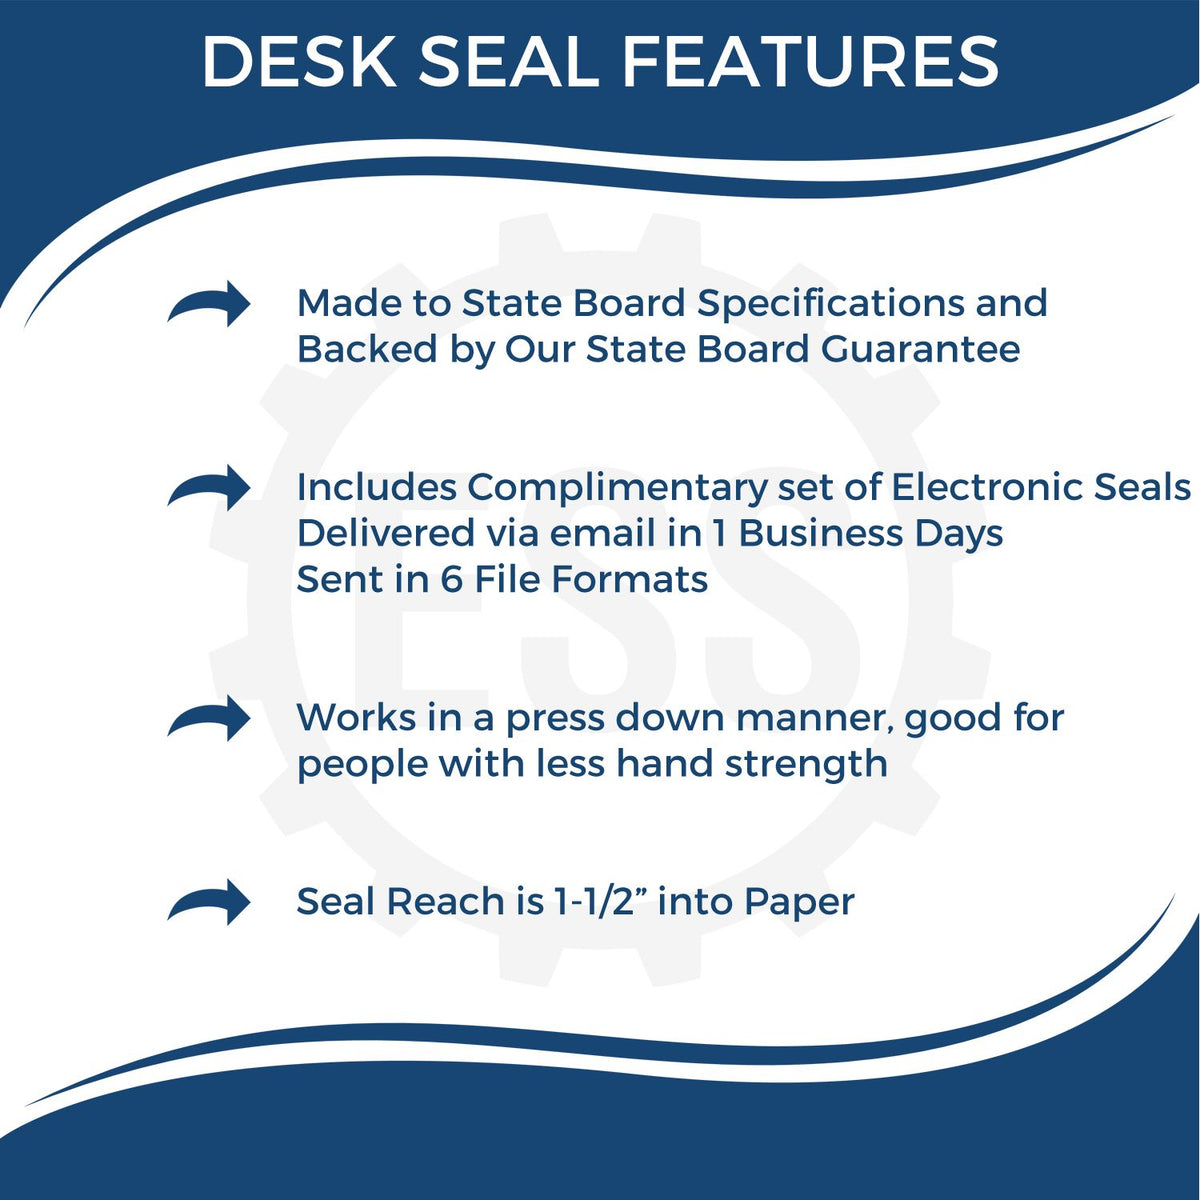 A picture of an infographic highlighting the selling points for the Alaska Engineer Desk Seal